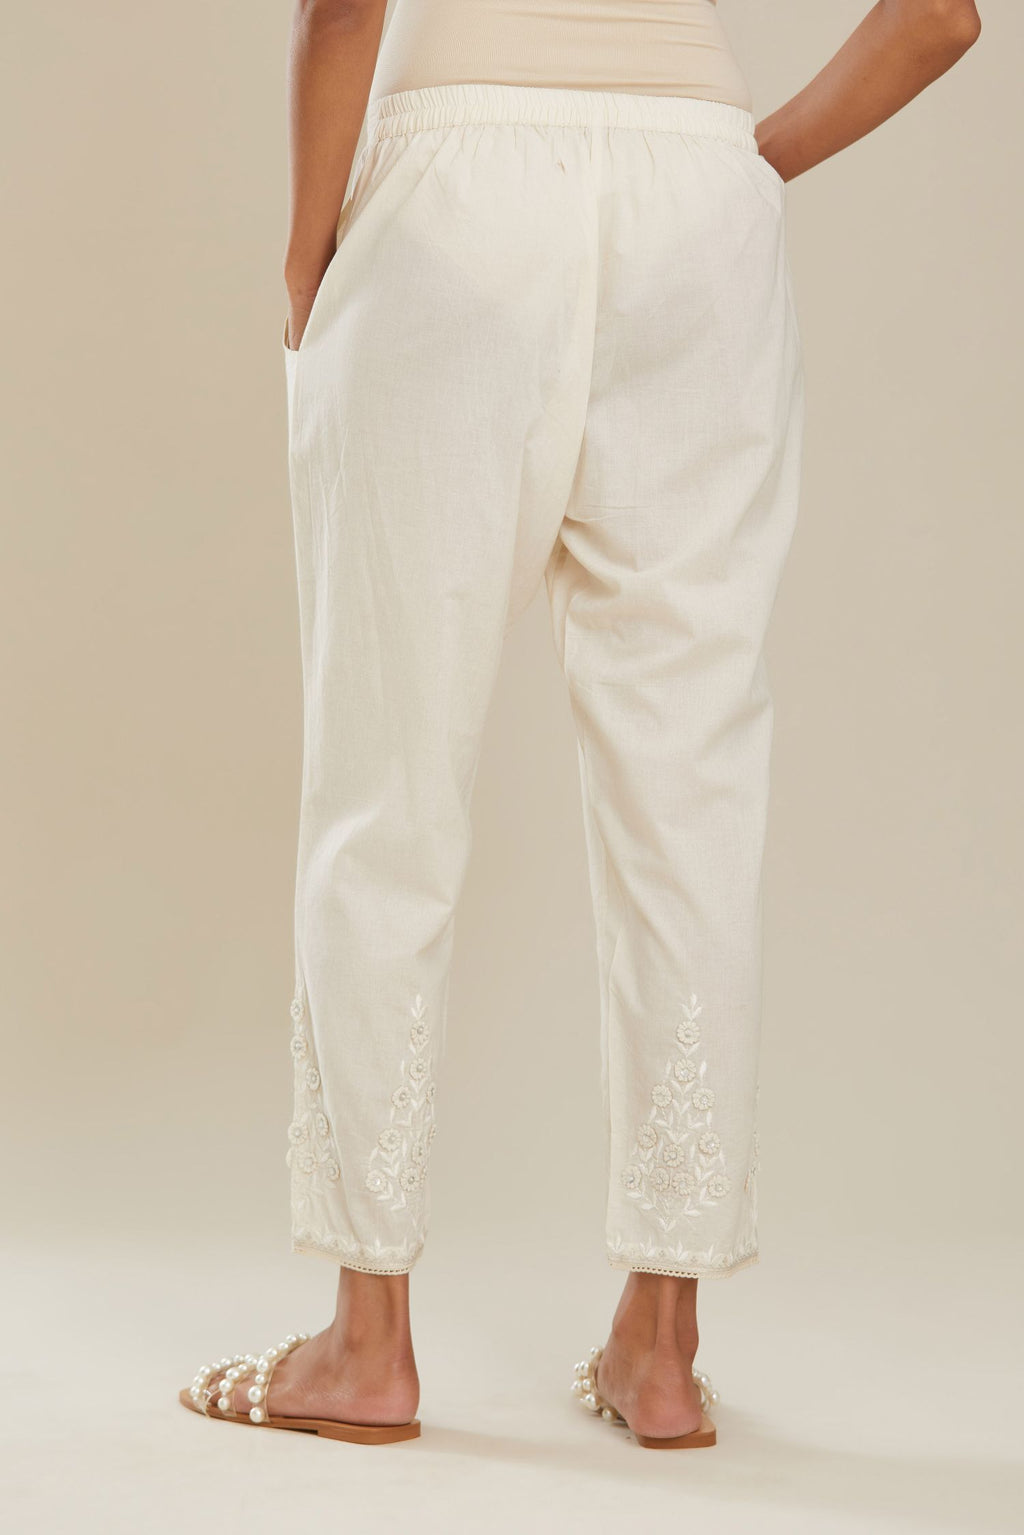 Off white cotton narrow pants with 3d embroidered flower boota at hem, highlighted with hand attached sequin and beads. Bottom hem edged with  lace. (Pants)